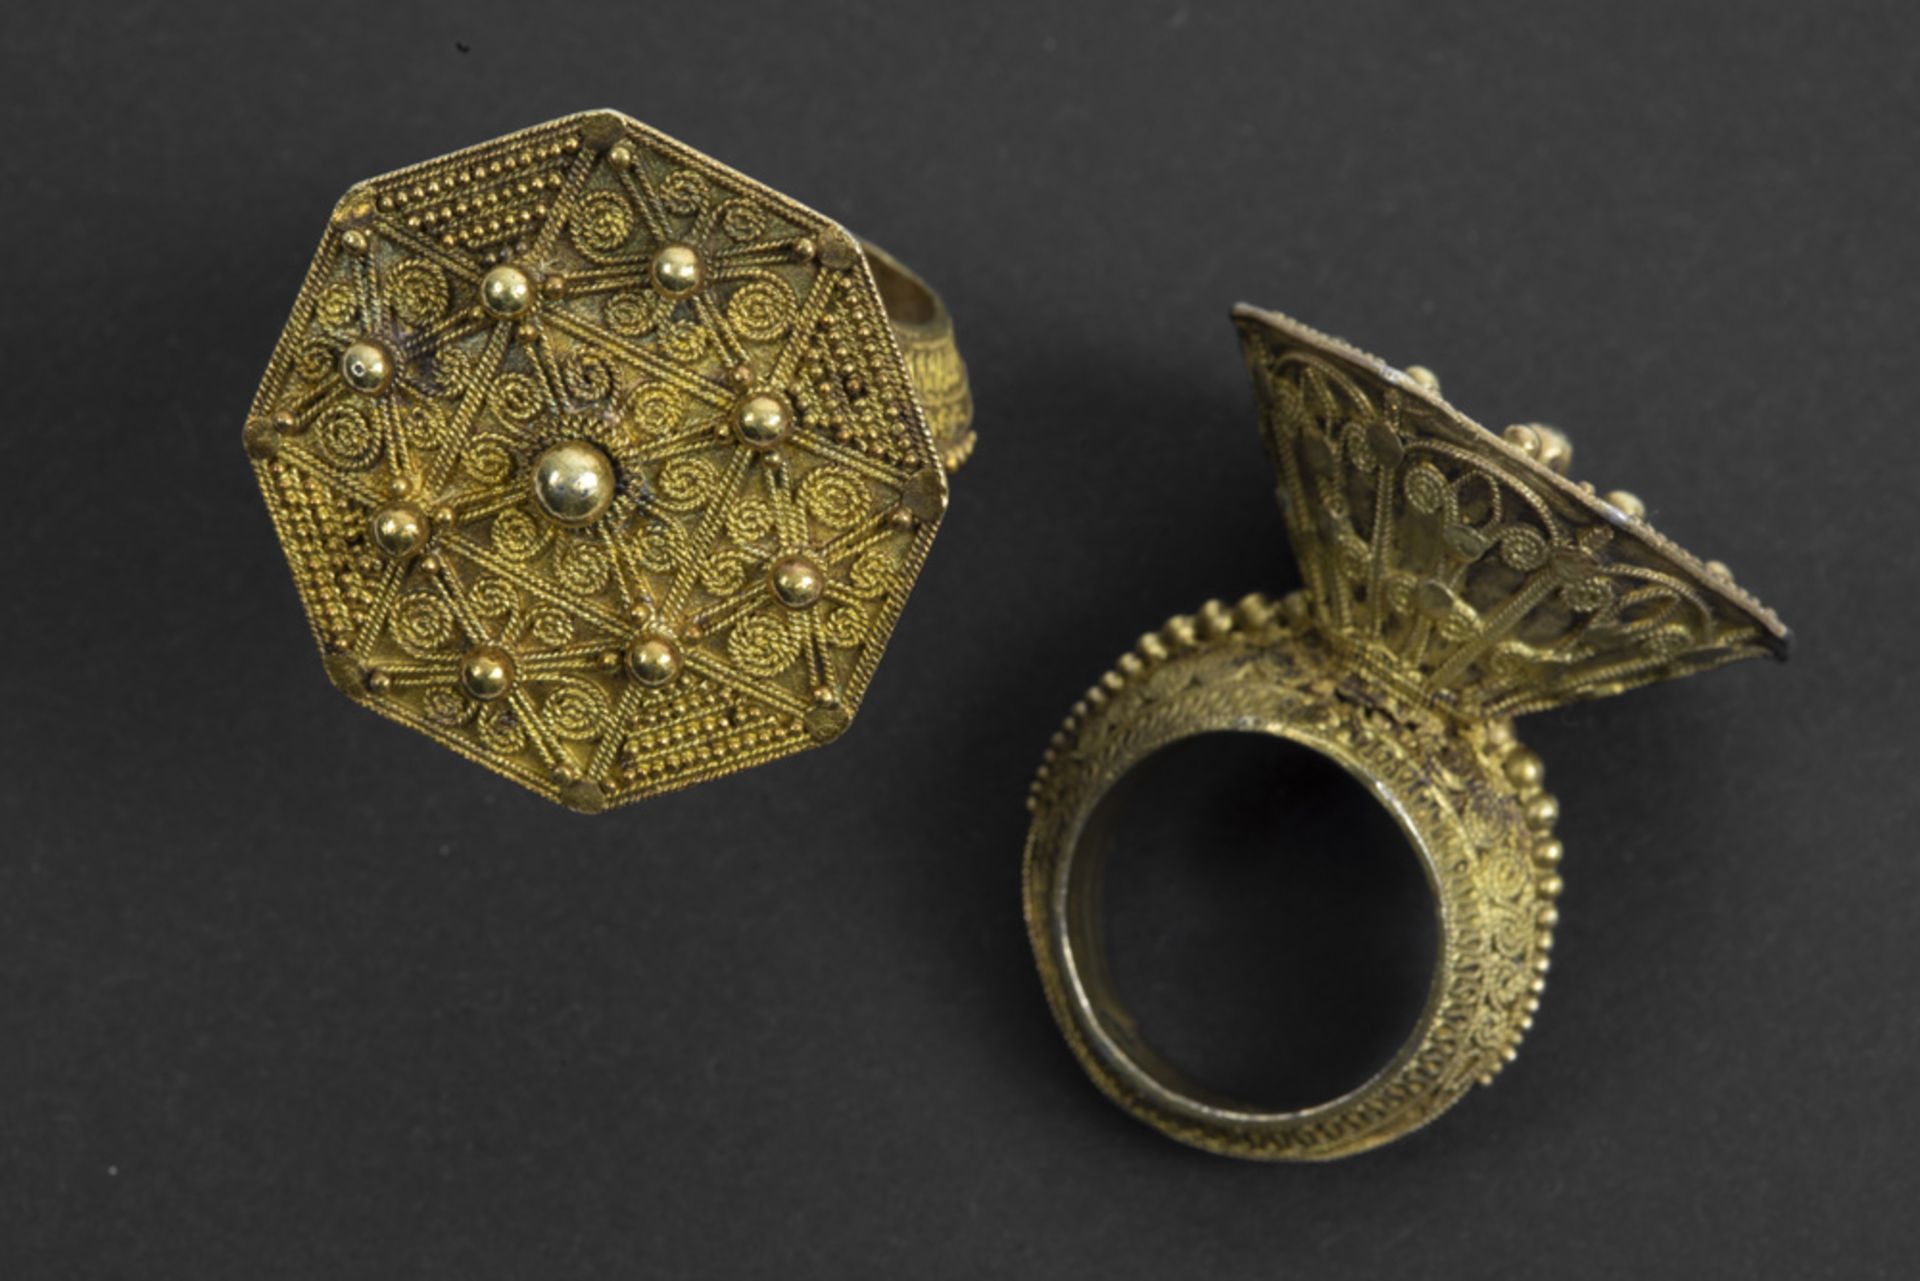 two 'antique' Indonesian Sumatra rings from the Batak with typical design in gilded silver - part of